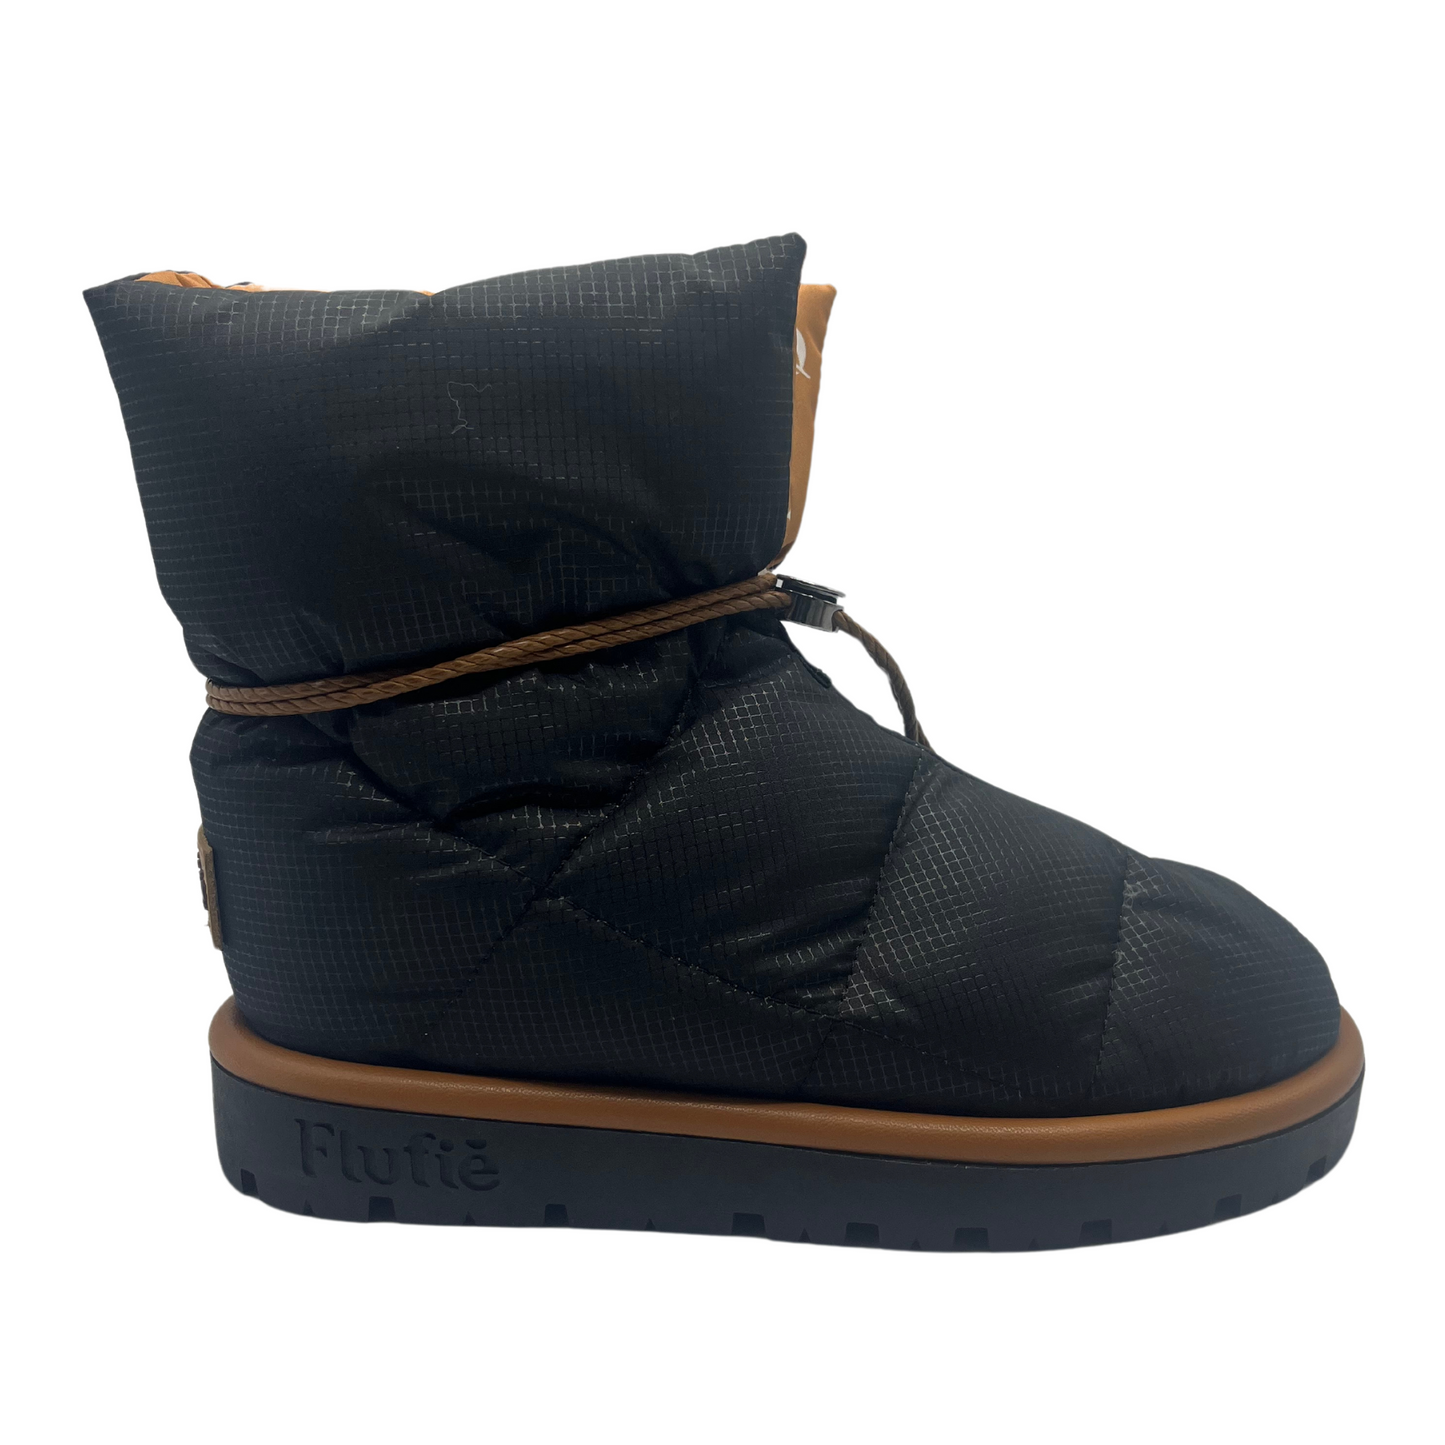 Right facing view of black puffer short boot with black and brown rubber outsole